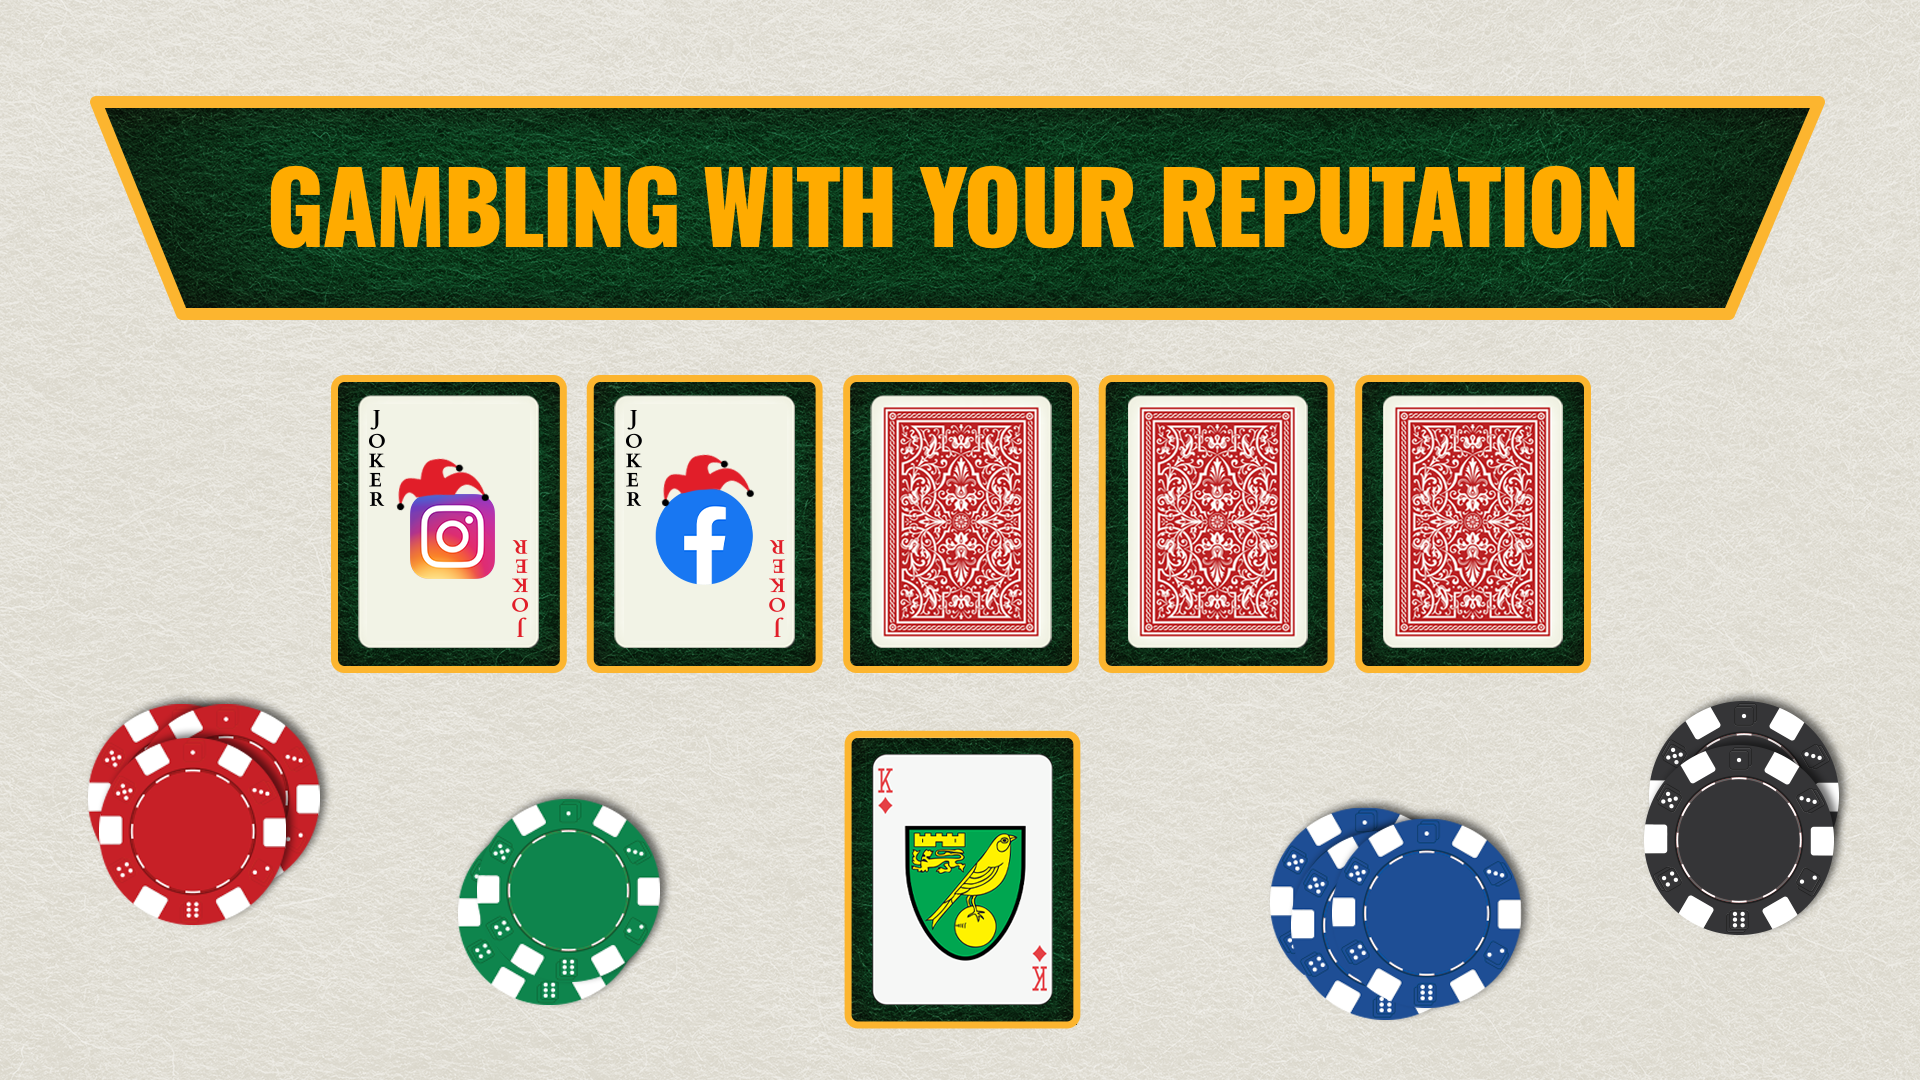 Gambling with Your Reputation: Why Partner Due Diligence Matters More than Ever